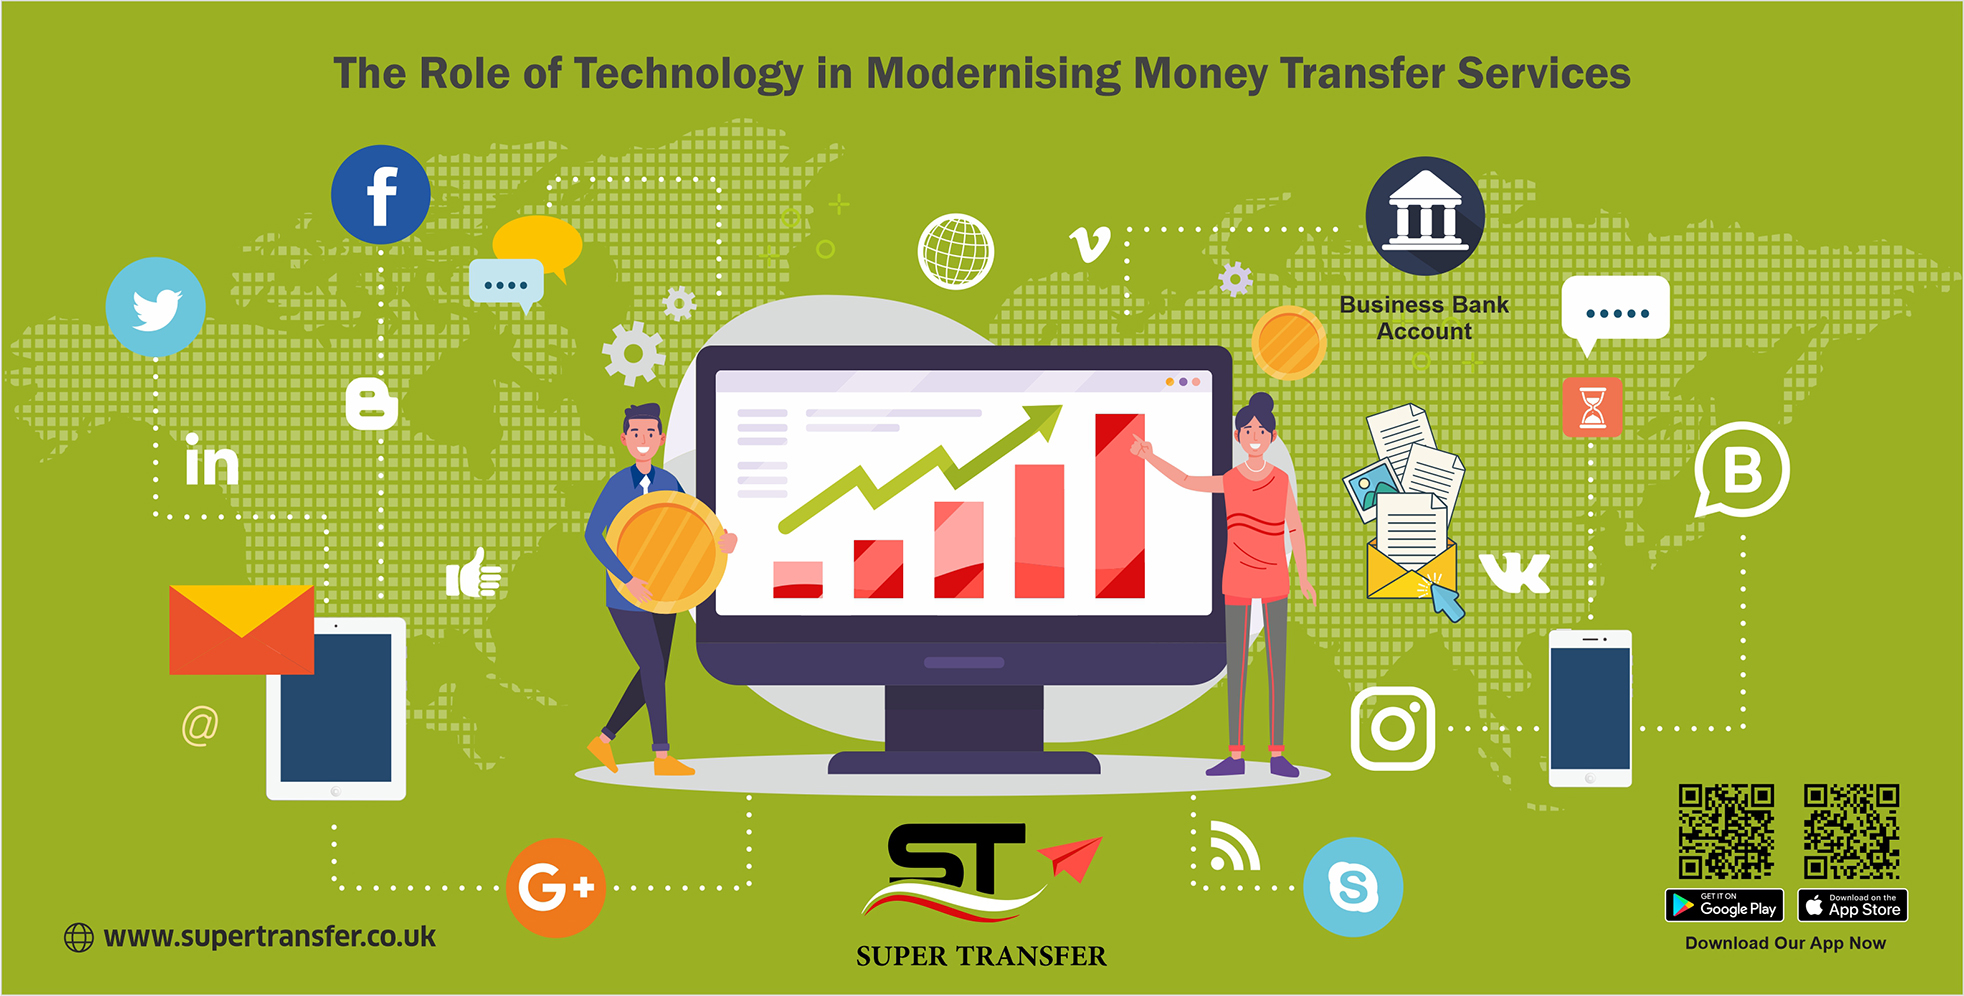 The Role of Technology in Modernising Money Transfer Services